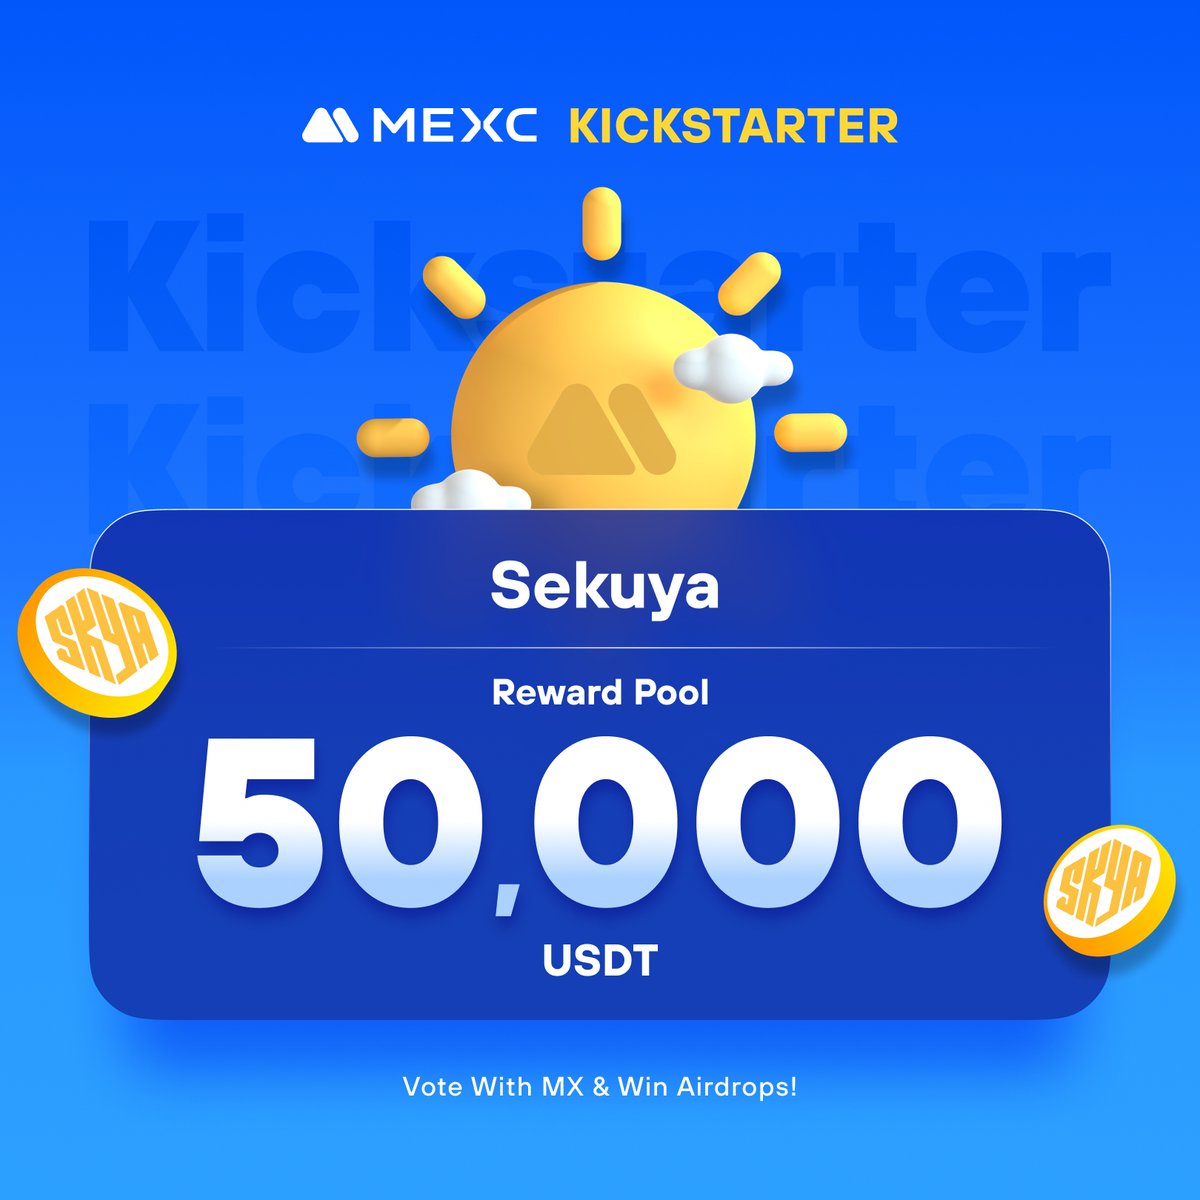 .@sekuyaofficial, a video game company aims to revolutionize gaming world with community-driven approach in all new anime epic fantasy universe, is coming to #MEXCKickstarter 🚀 🗳Vote with $MX to share massive airdrops 📈 $SKYA/USDT Trading: 2024-05-21 14:00 (UTC) Details: